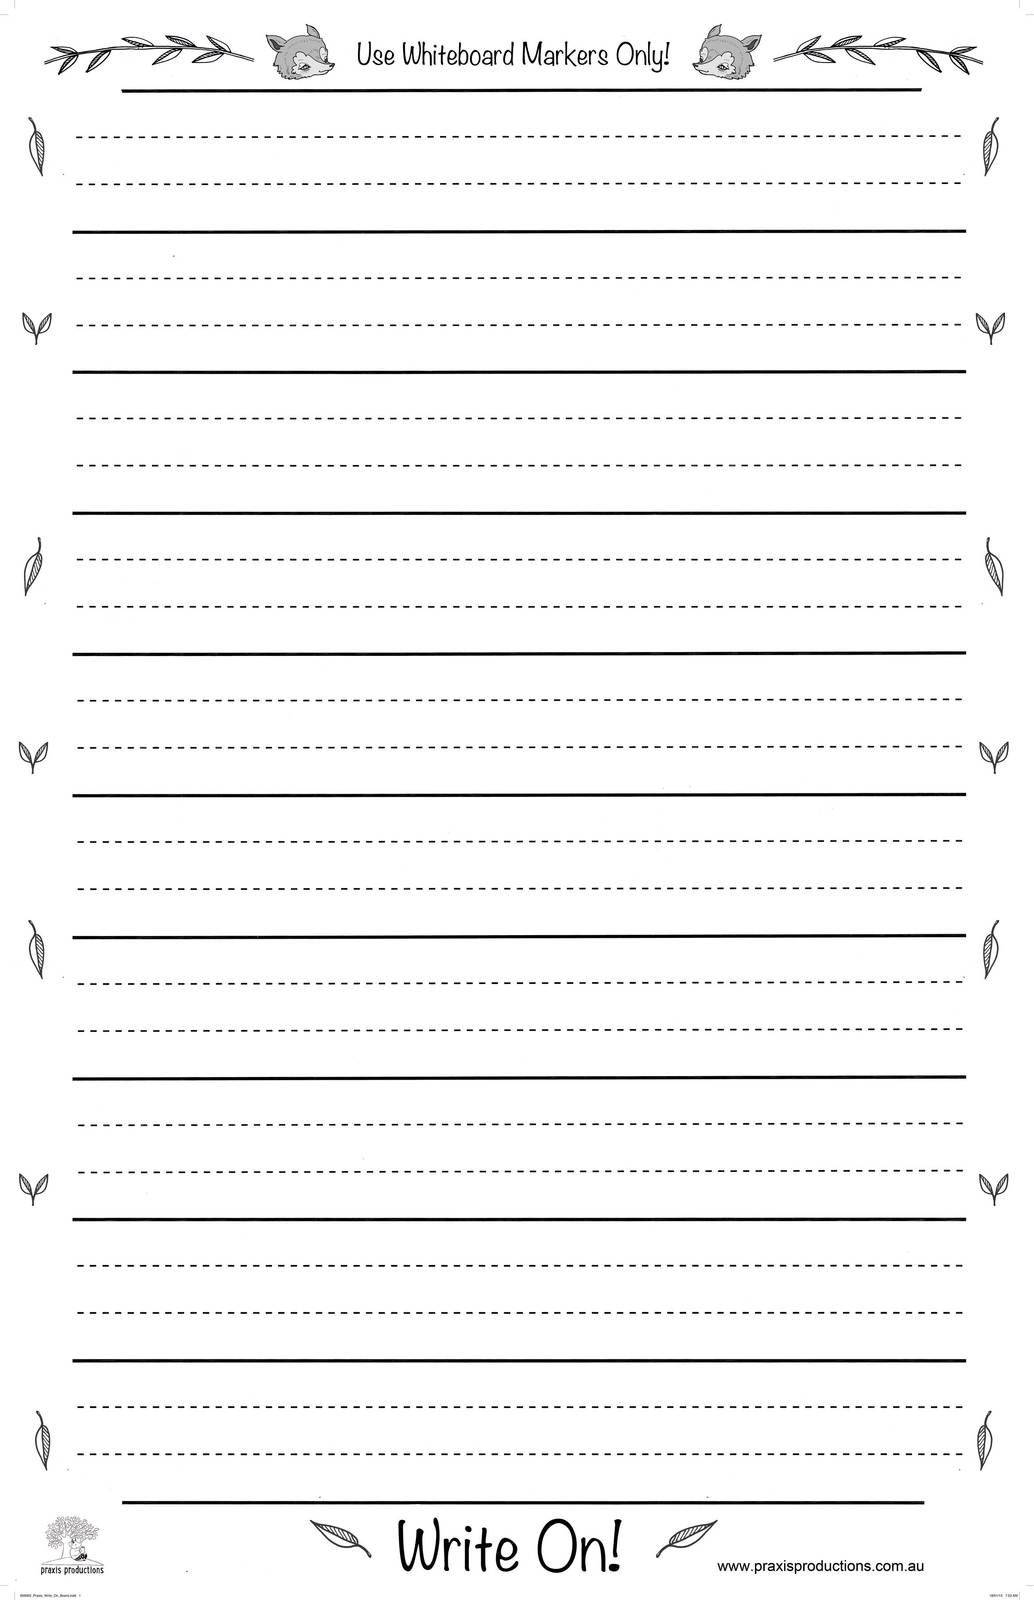 Write On - Large Laminated Dotted Thirds Chart - Praxis Productions